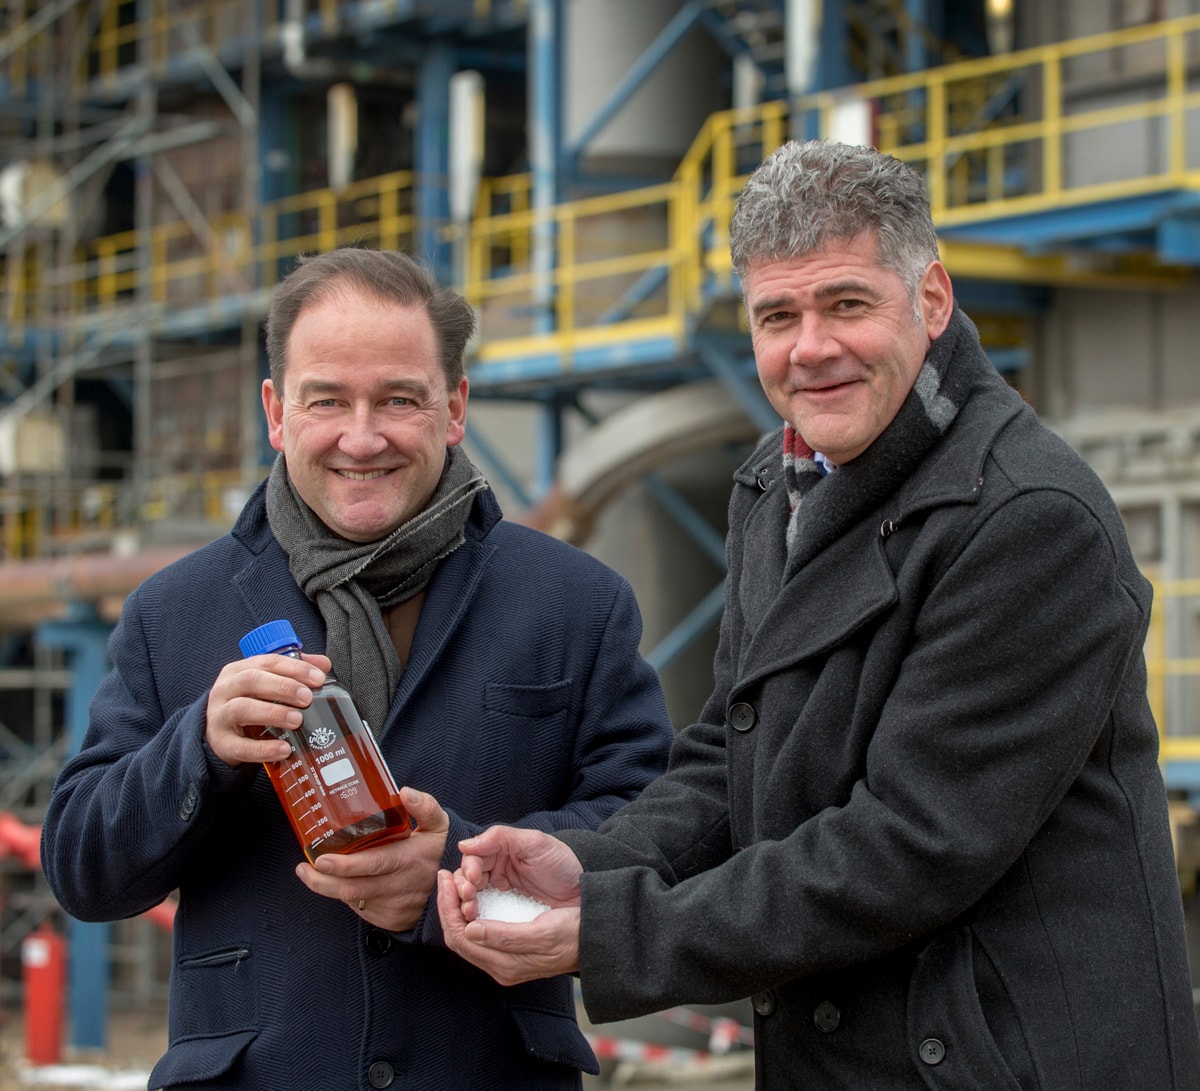 Jeroen Castelijn, SABIC general manager Geleen site, and Frank Kuijpers, SABIC general
                                    manager corporate sustainability, celebrate the launch of certified circular polymers production
                                    in the Netherlands.